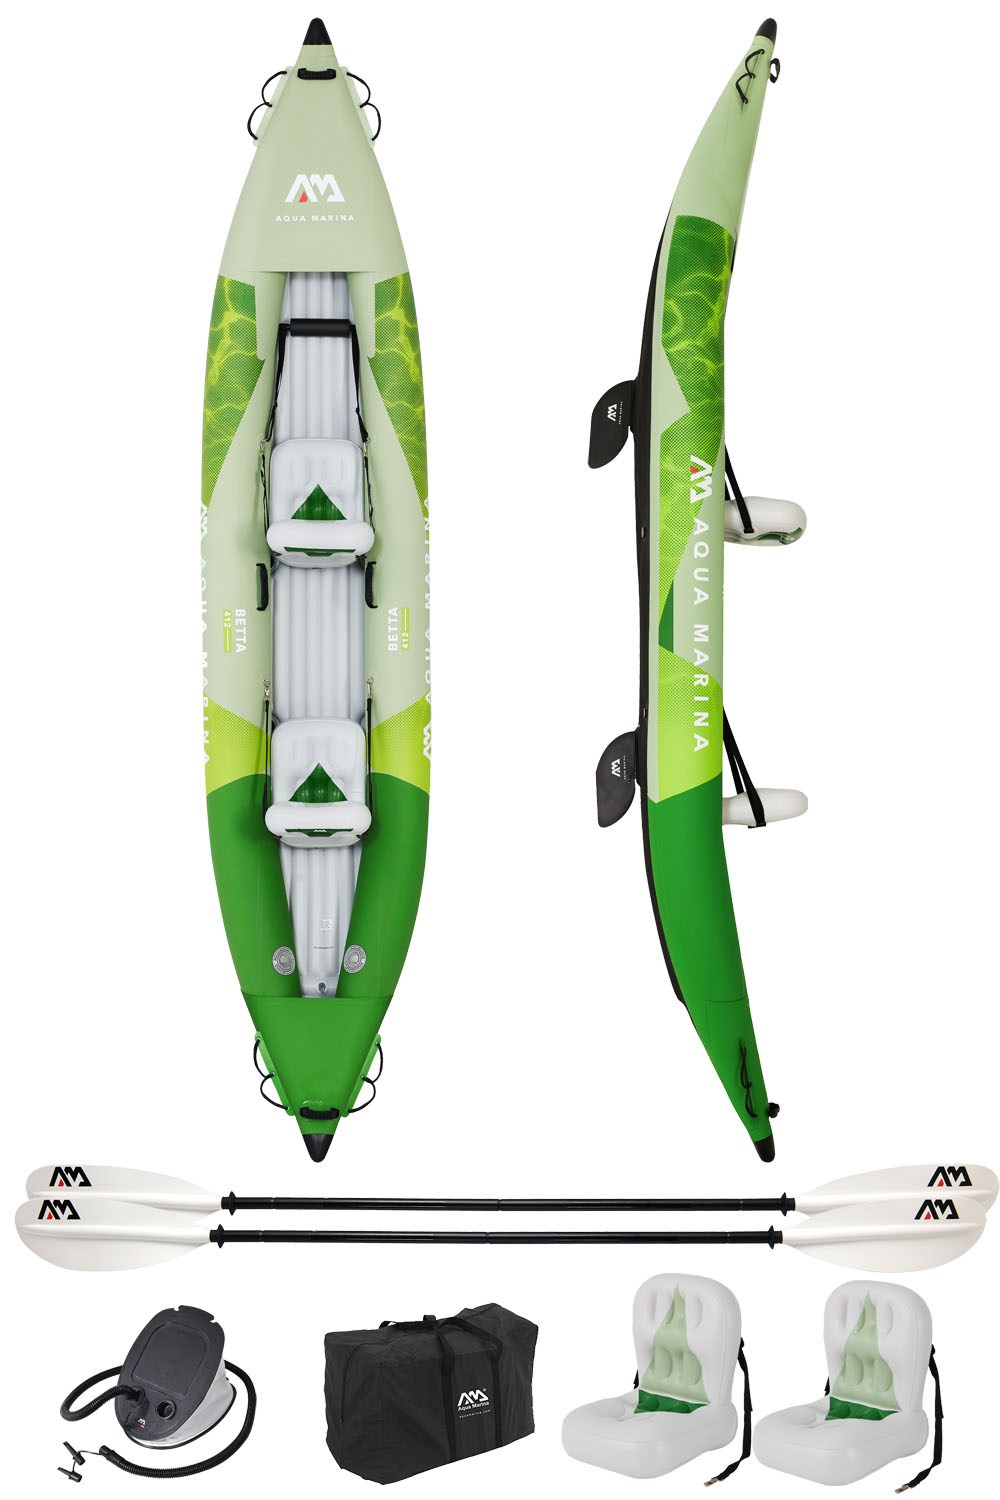 13'6”/11' Inflatable Recreational Kayak - 2 Person with Drop Stitch Floor  and Accessories Including Kayak Seats with High Back Support, Paddle, Fin